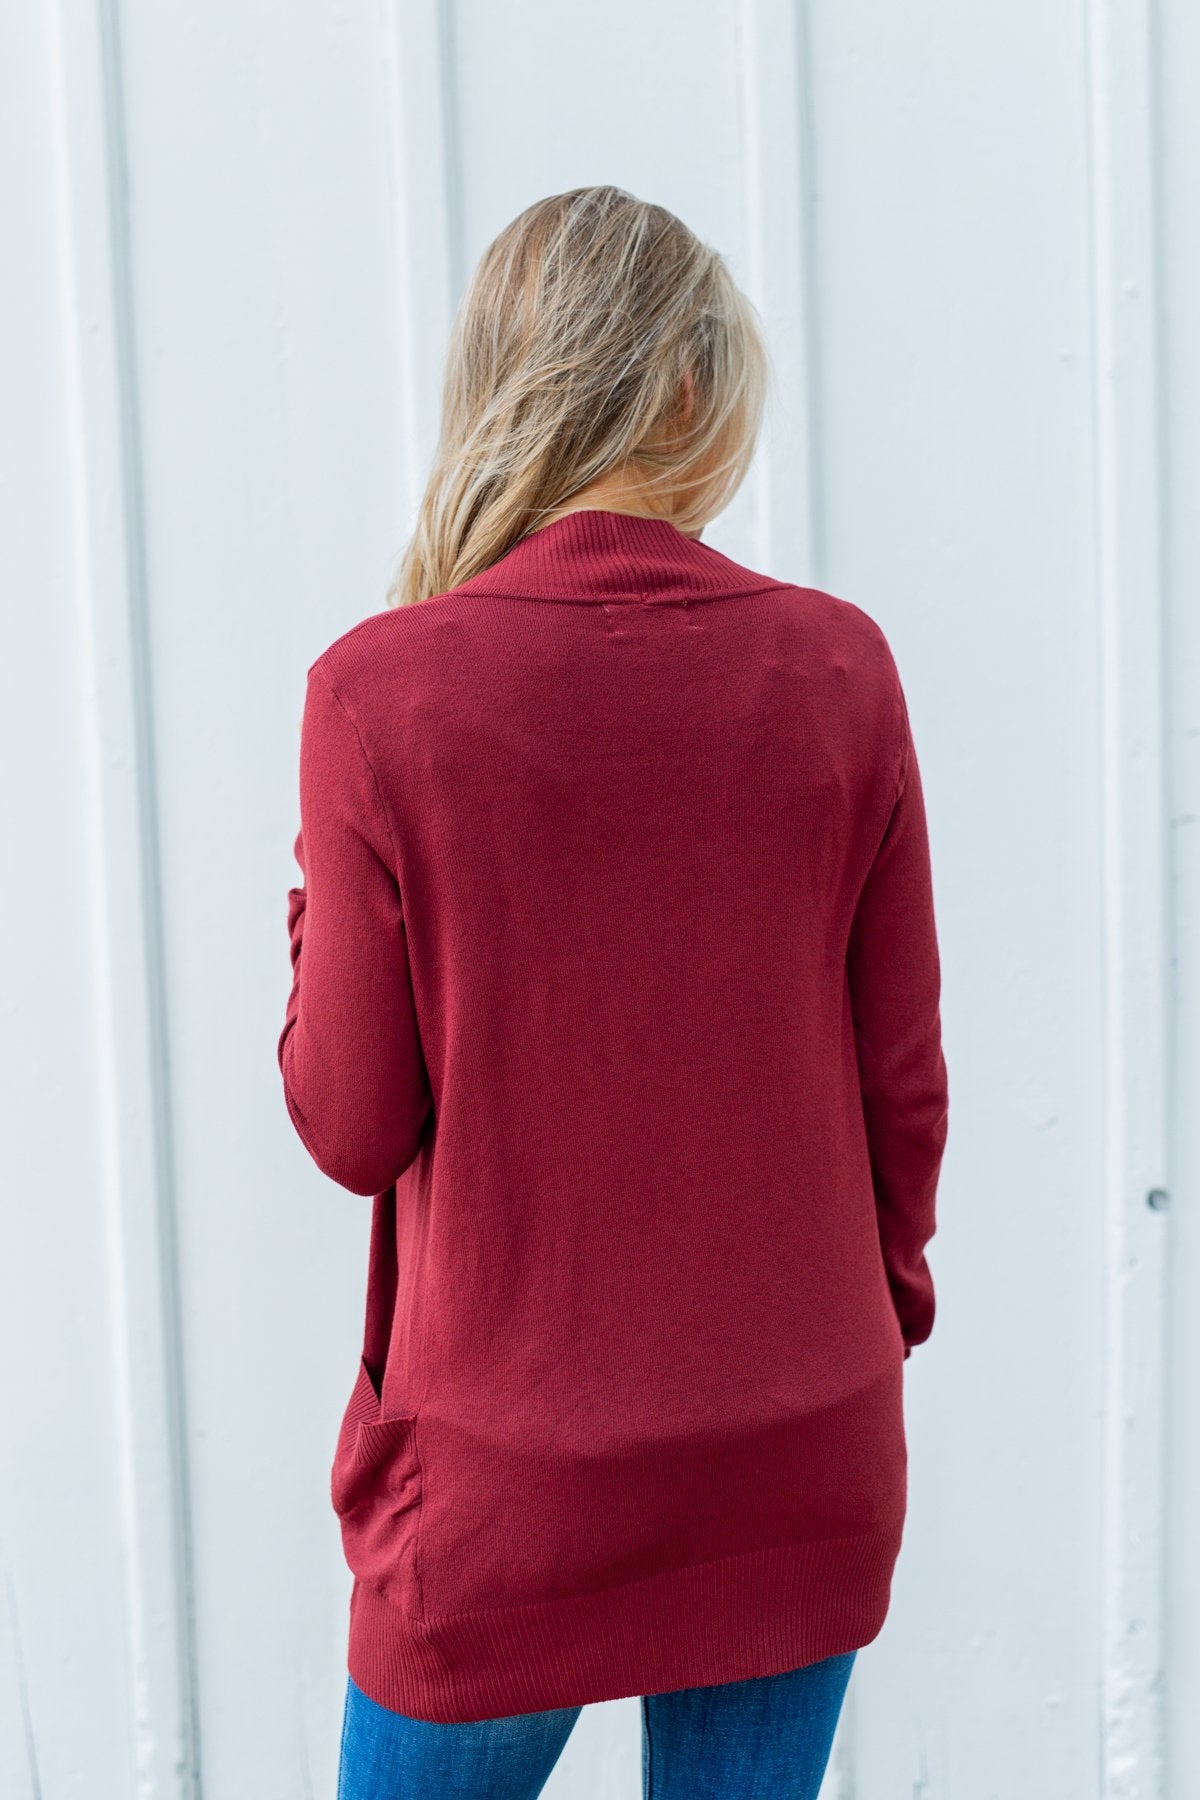 Light Weight Open Front Cardigan- Brick Red